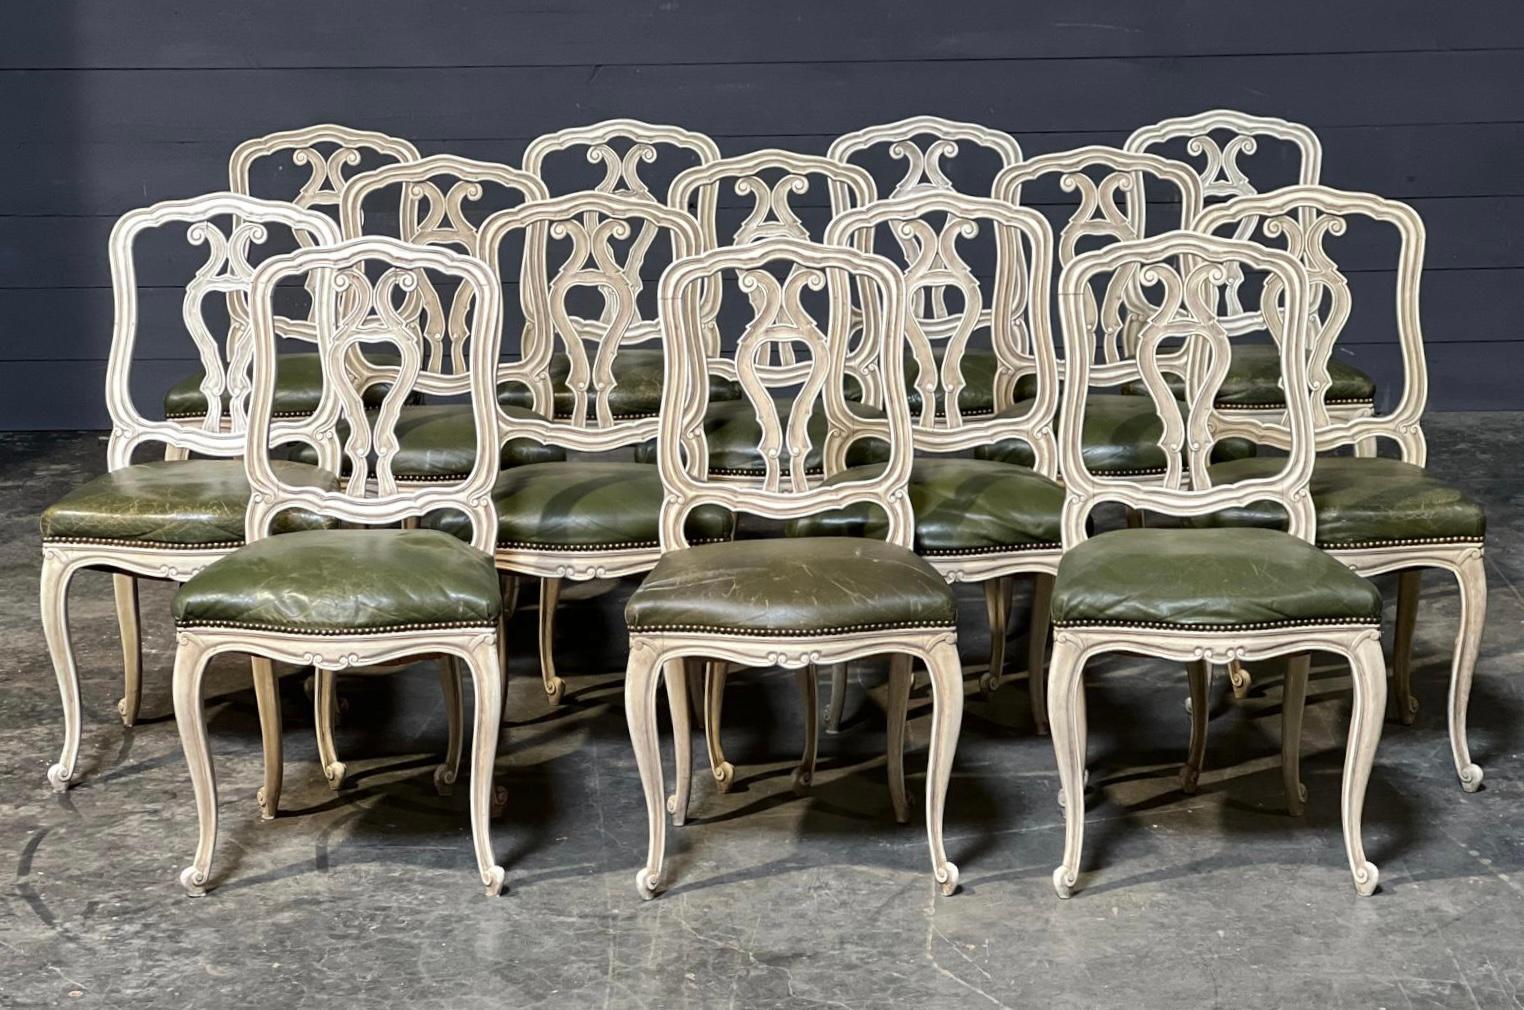 A very rare chance to acquire a Set of 16 French Dining Chairs. I say 16 but I have only photographed 14 as one of the chairs has a slightly warped frame, number 15 if perfect but it would have been an odd number ! So there are 15 good chairs and 1